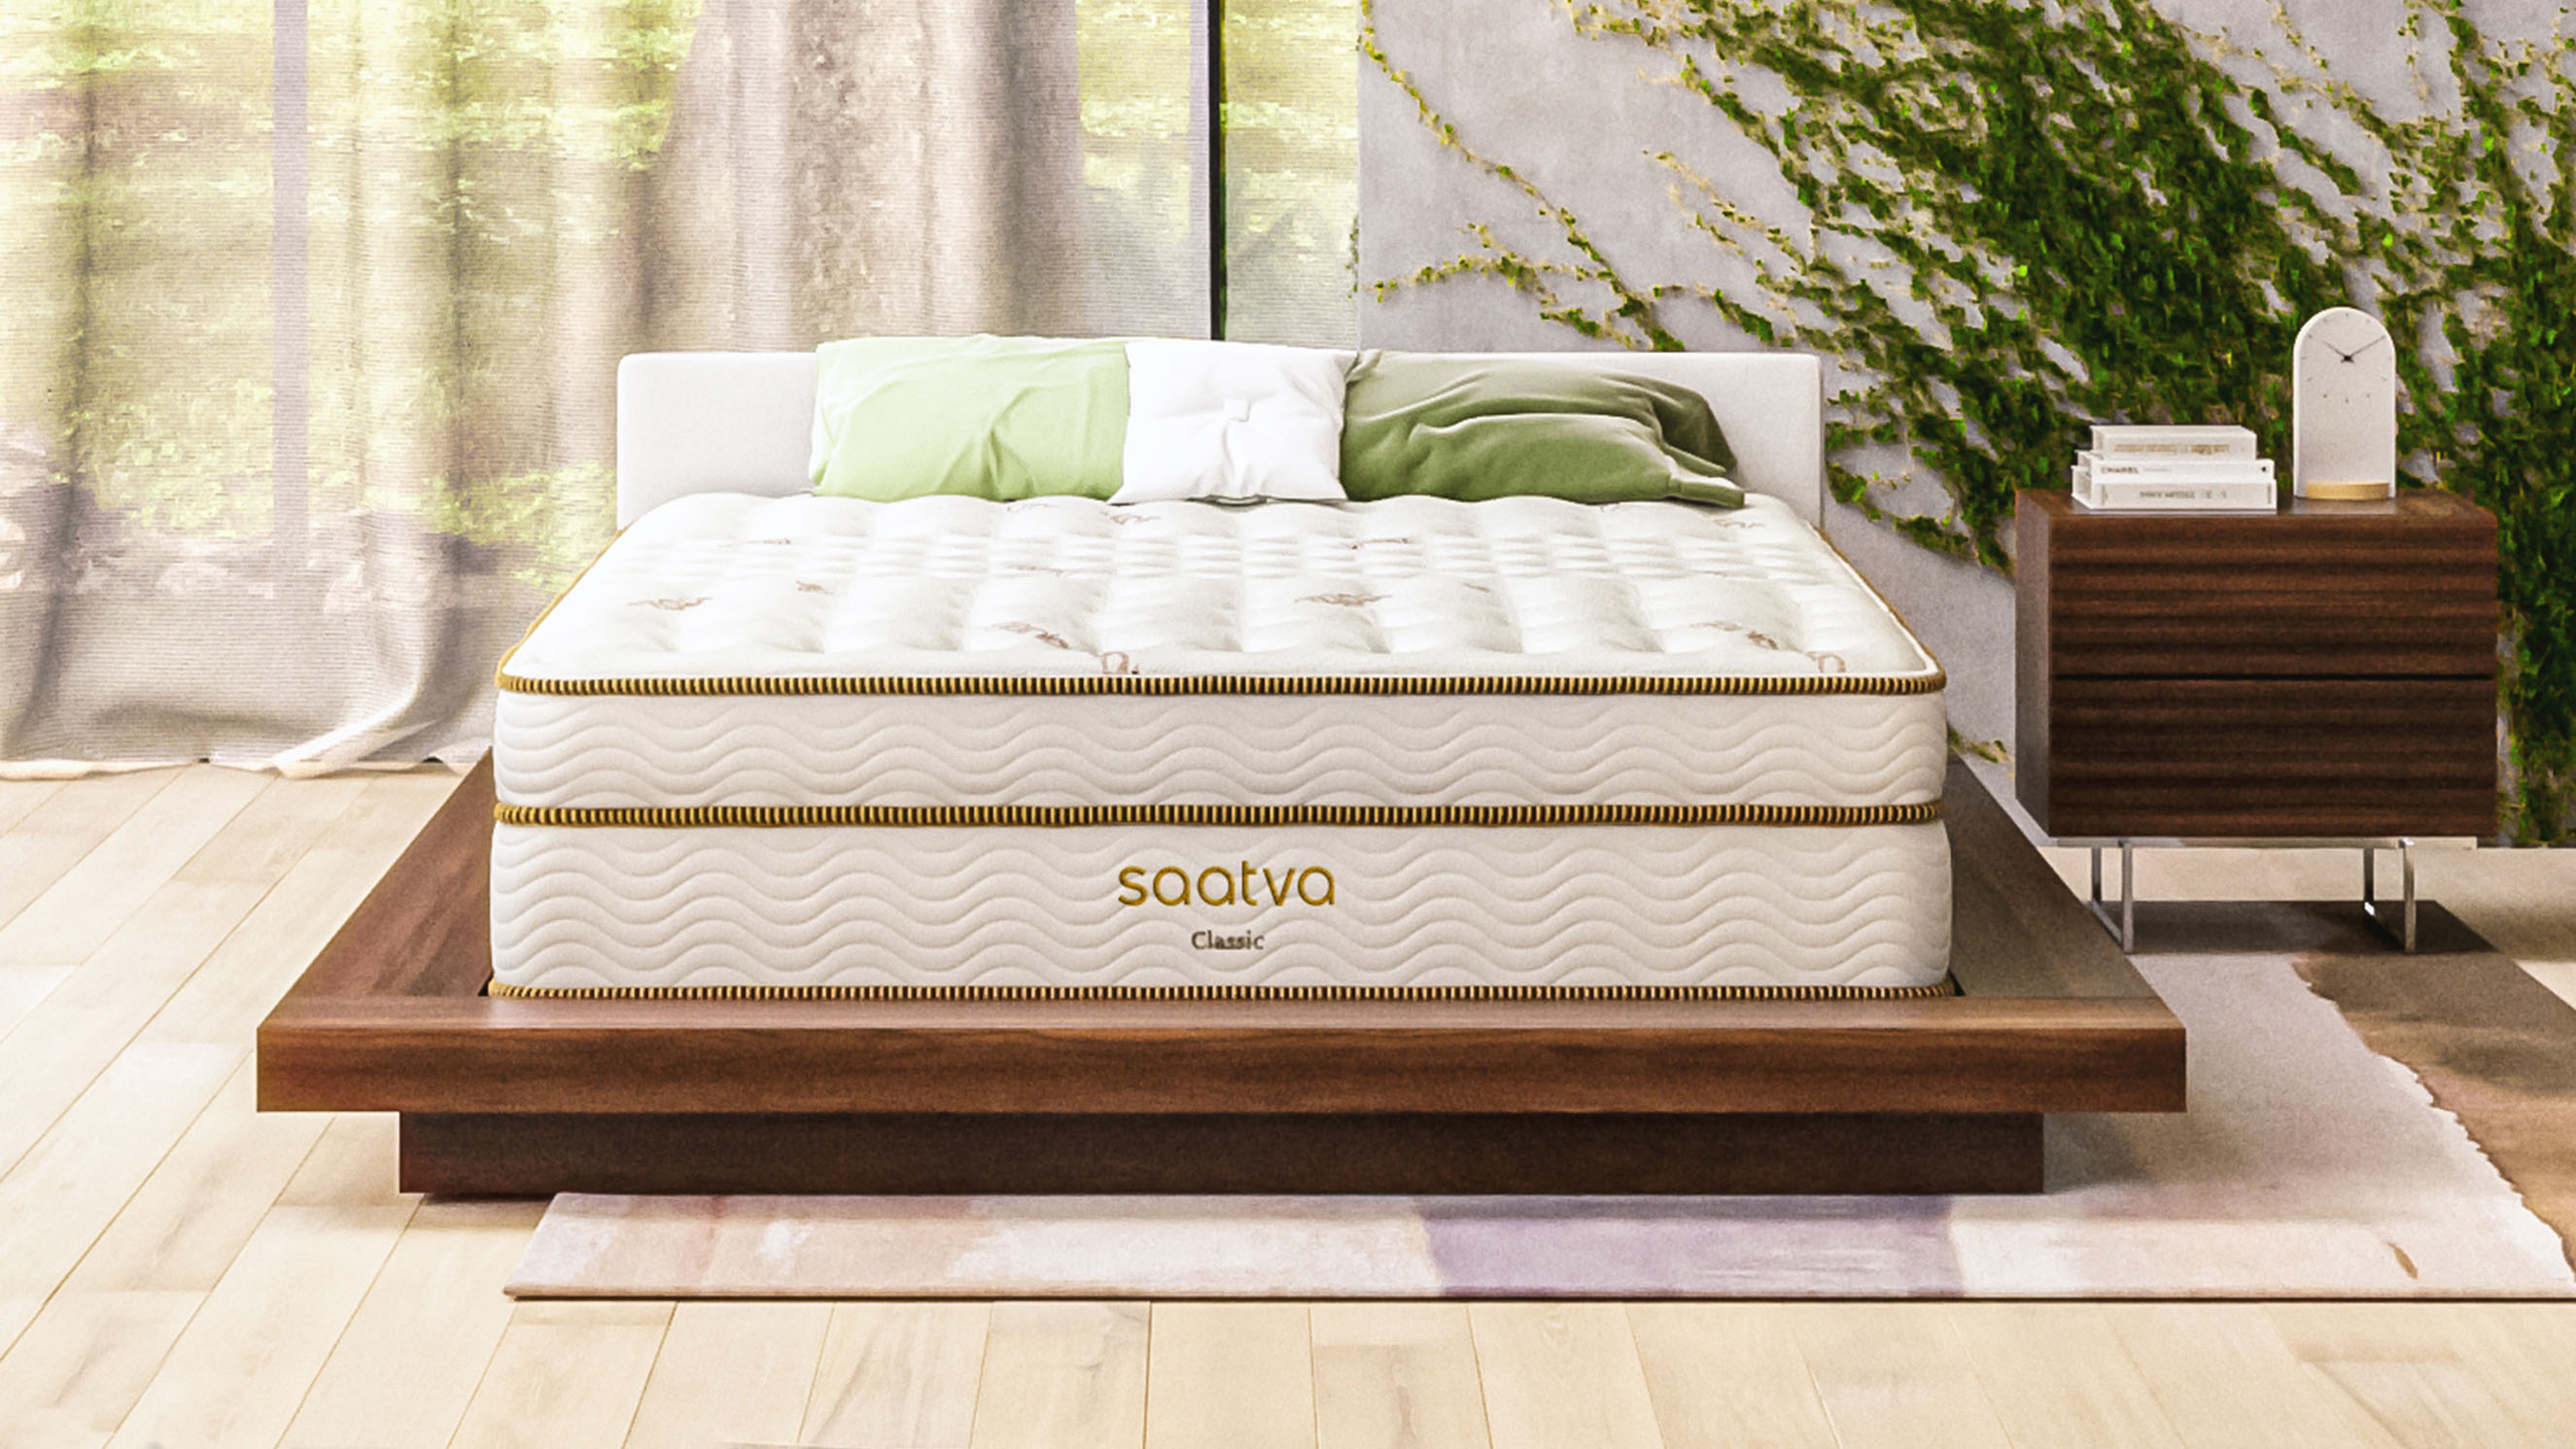 Image shows the Saatva Classic hybrid mattress on a dark brown bed frame